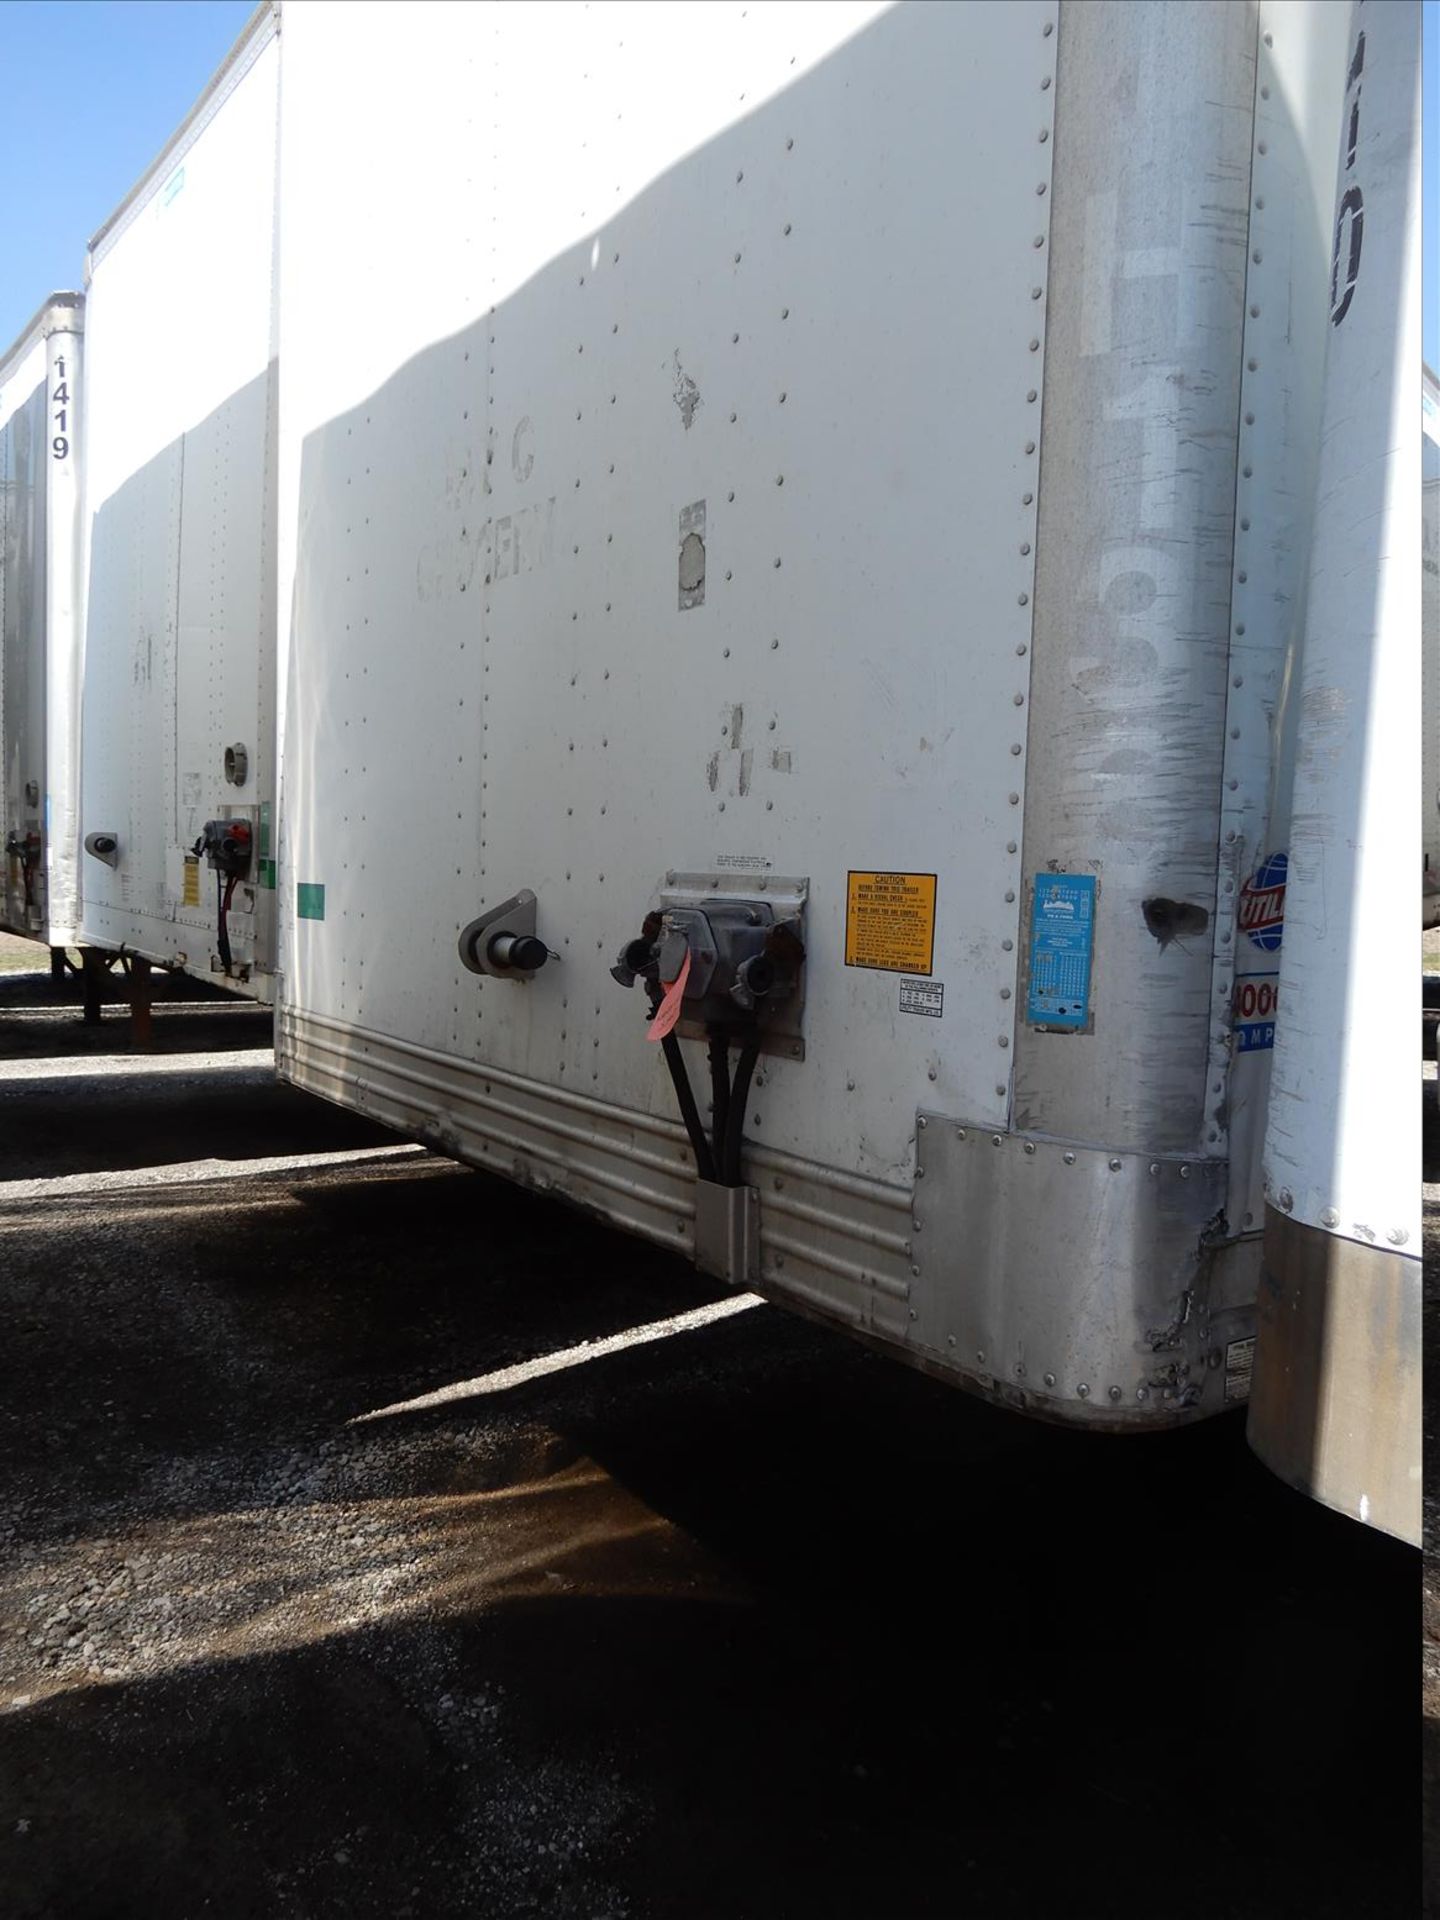 2010 Utility Trailer - Located in Indianapolis, IN - Image 2 of 36